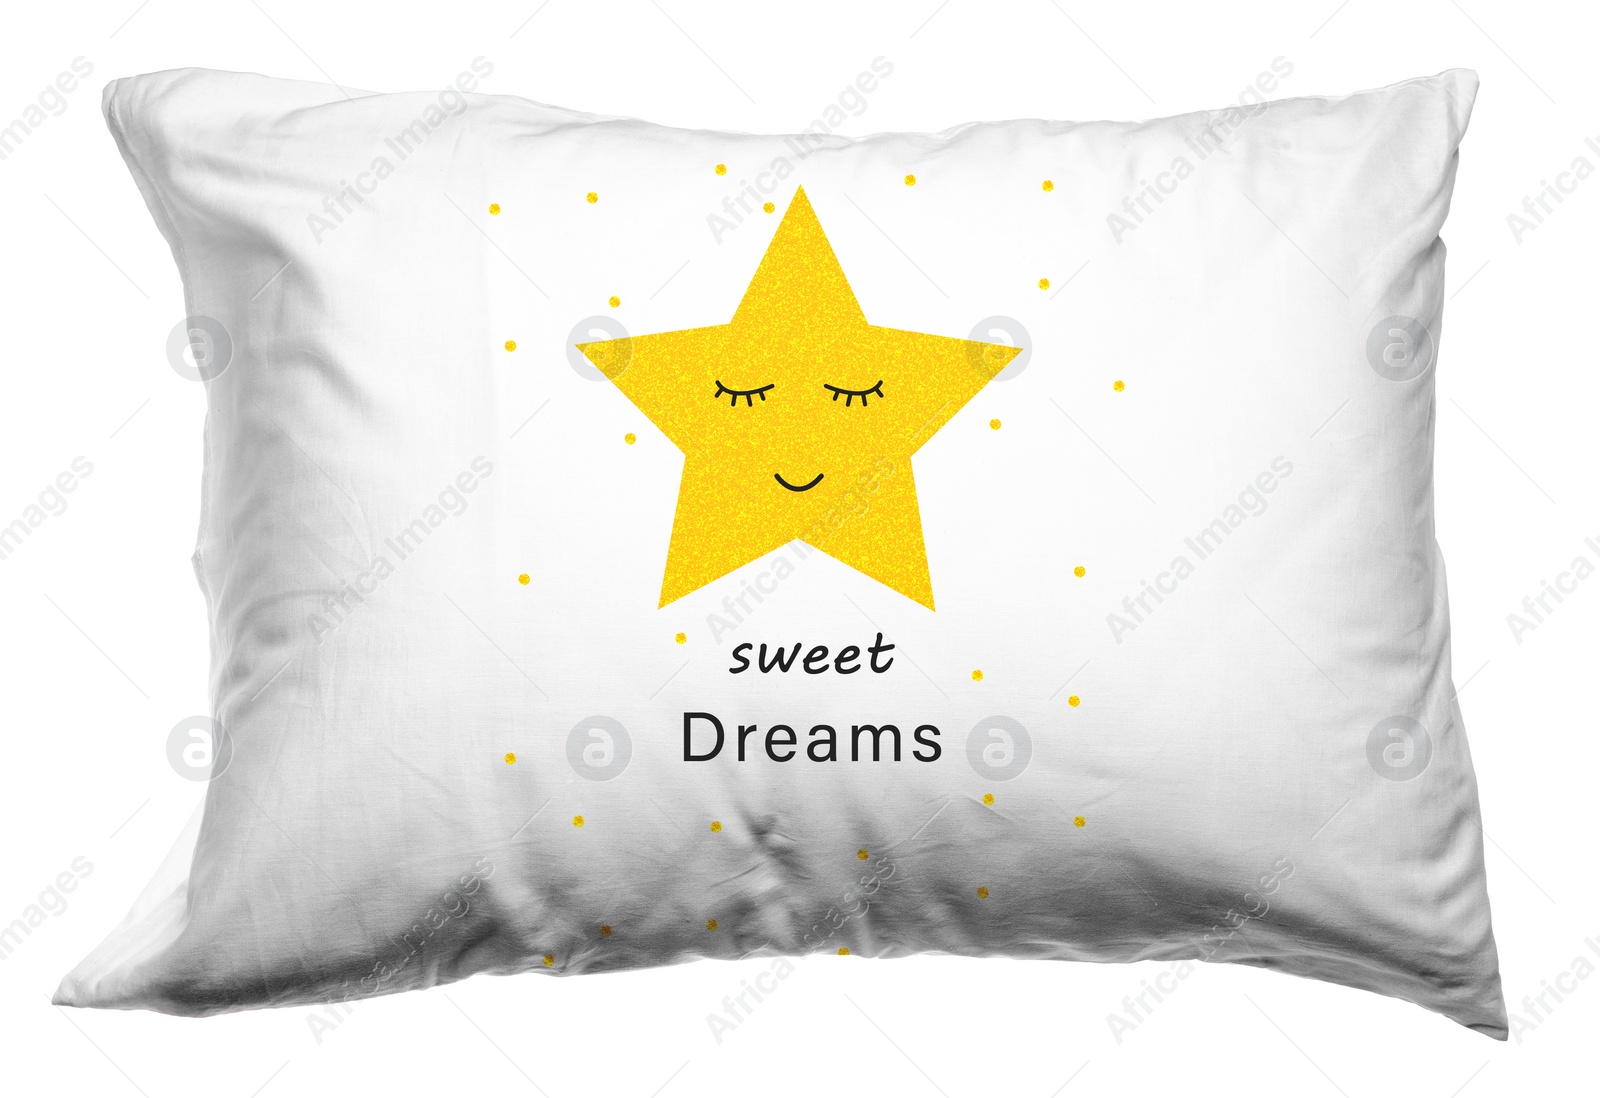 Image of Soft pillow with printed cute star and words Sweet Dreams isolated on white